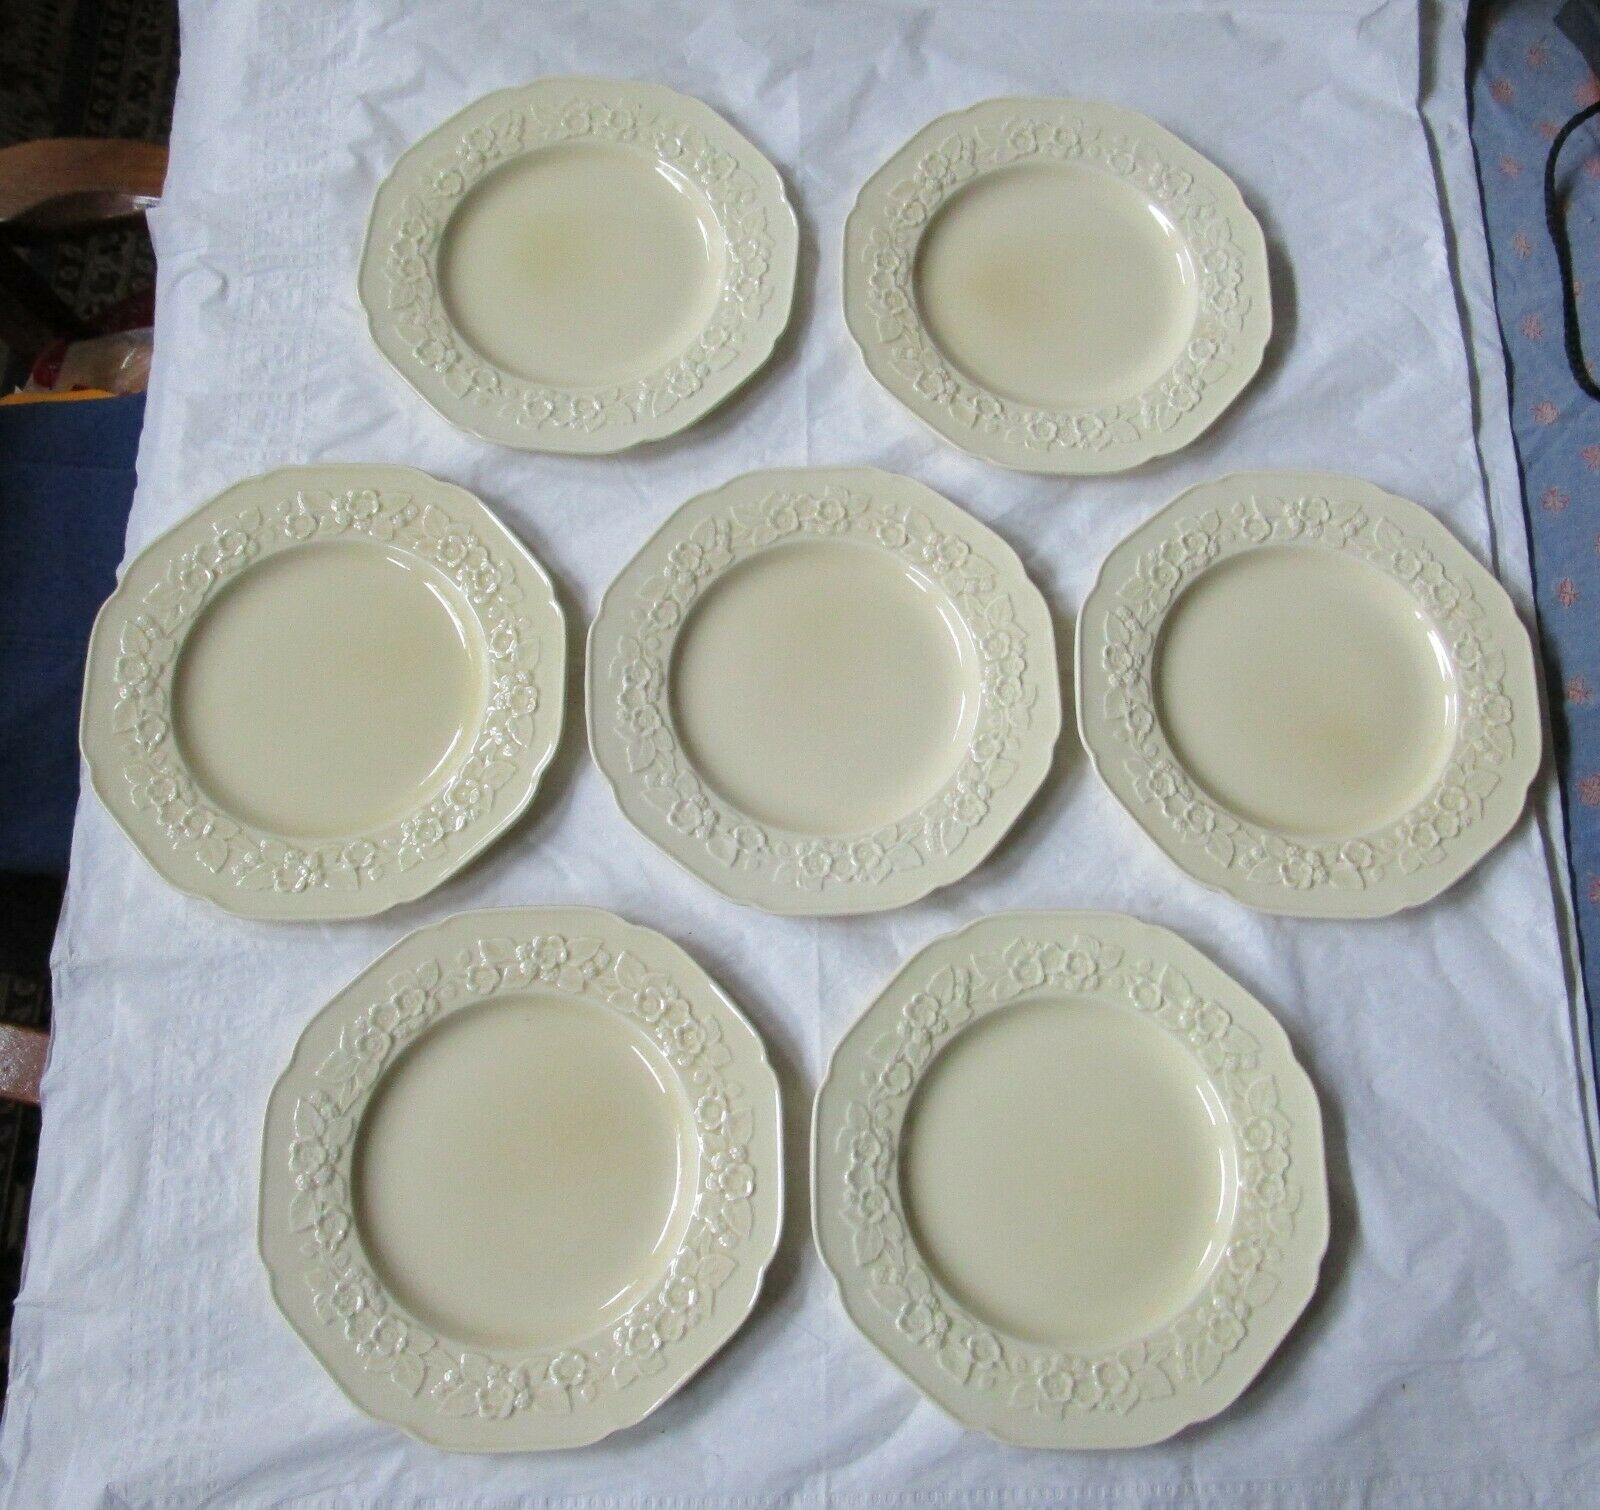 Set Of 7 Crown Ducal Gainsborough 8-7/8" Luncheon Plates, Off-white (c. 1930s)